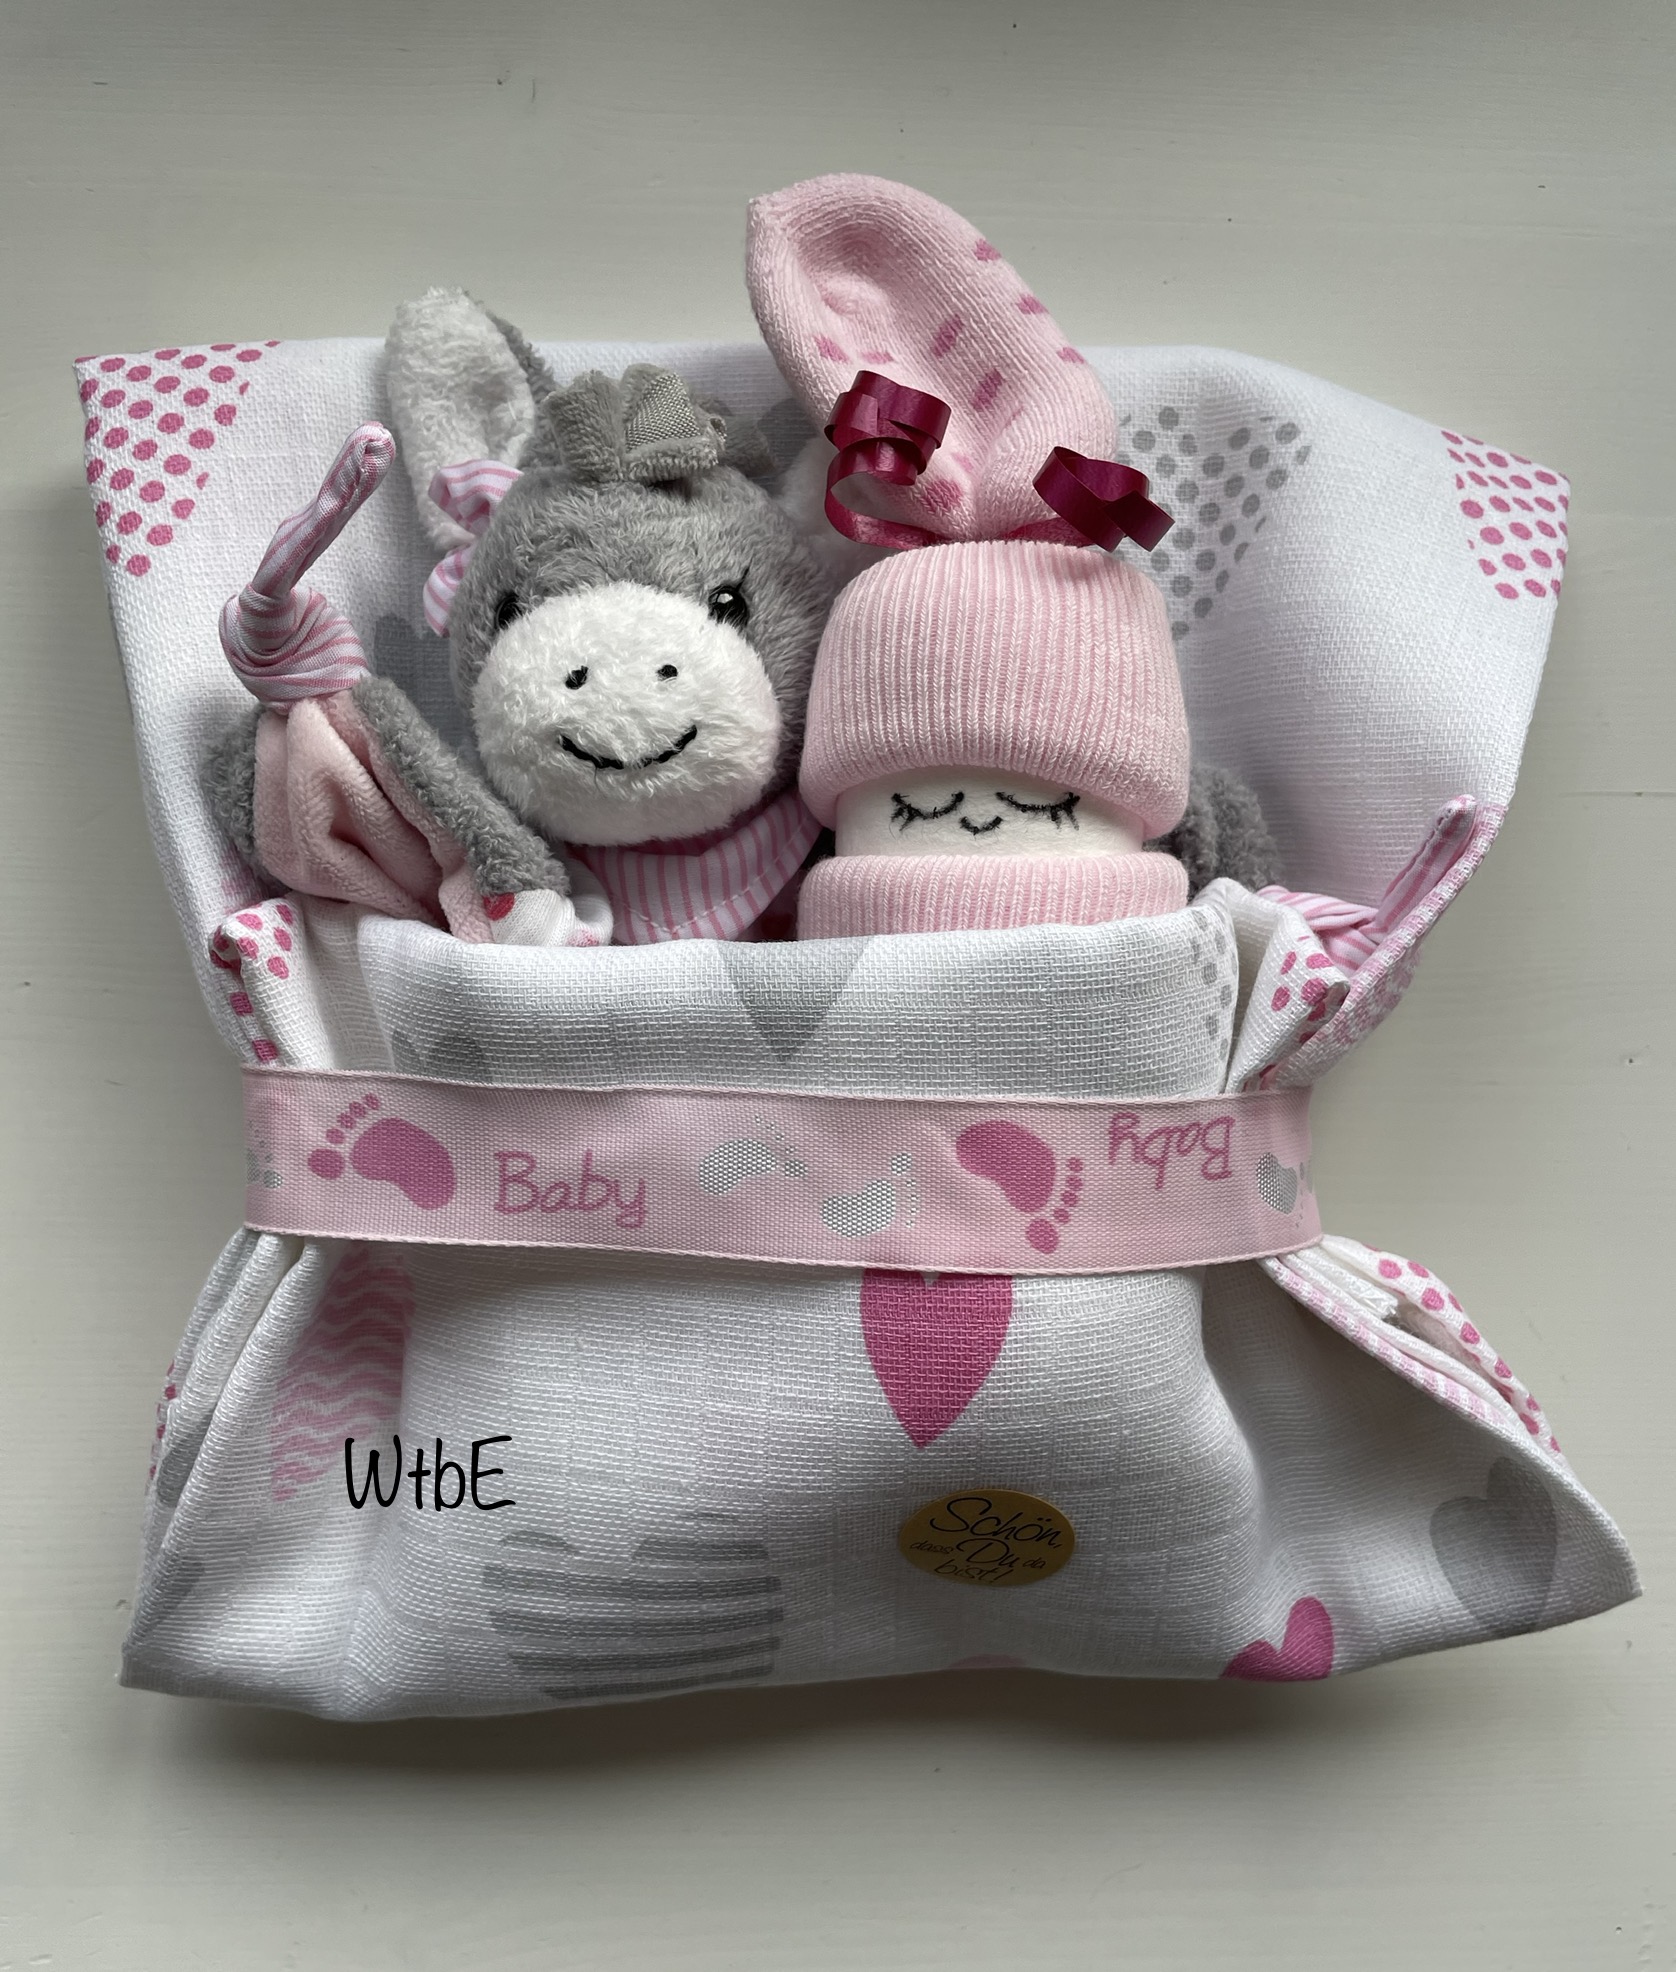 small diaper cake: diaper baby and a cuddly donkey toy in a cloth